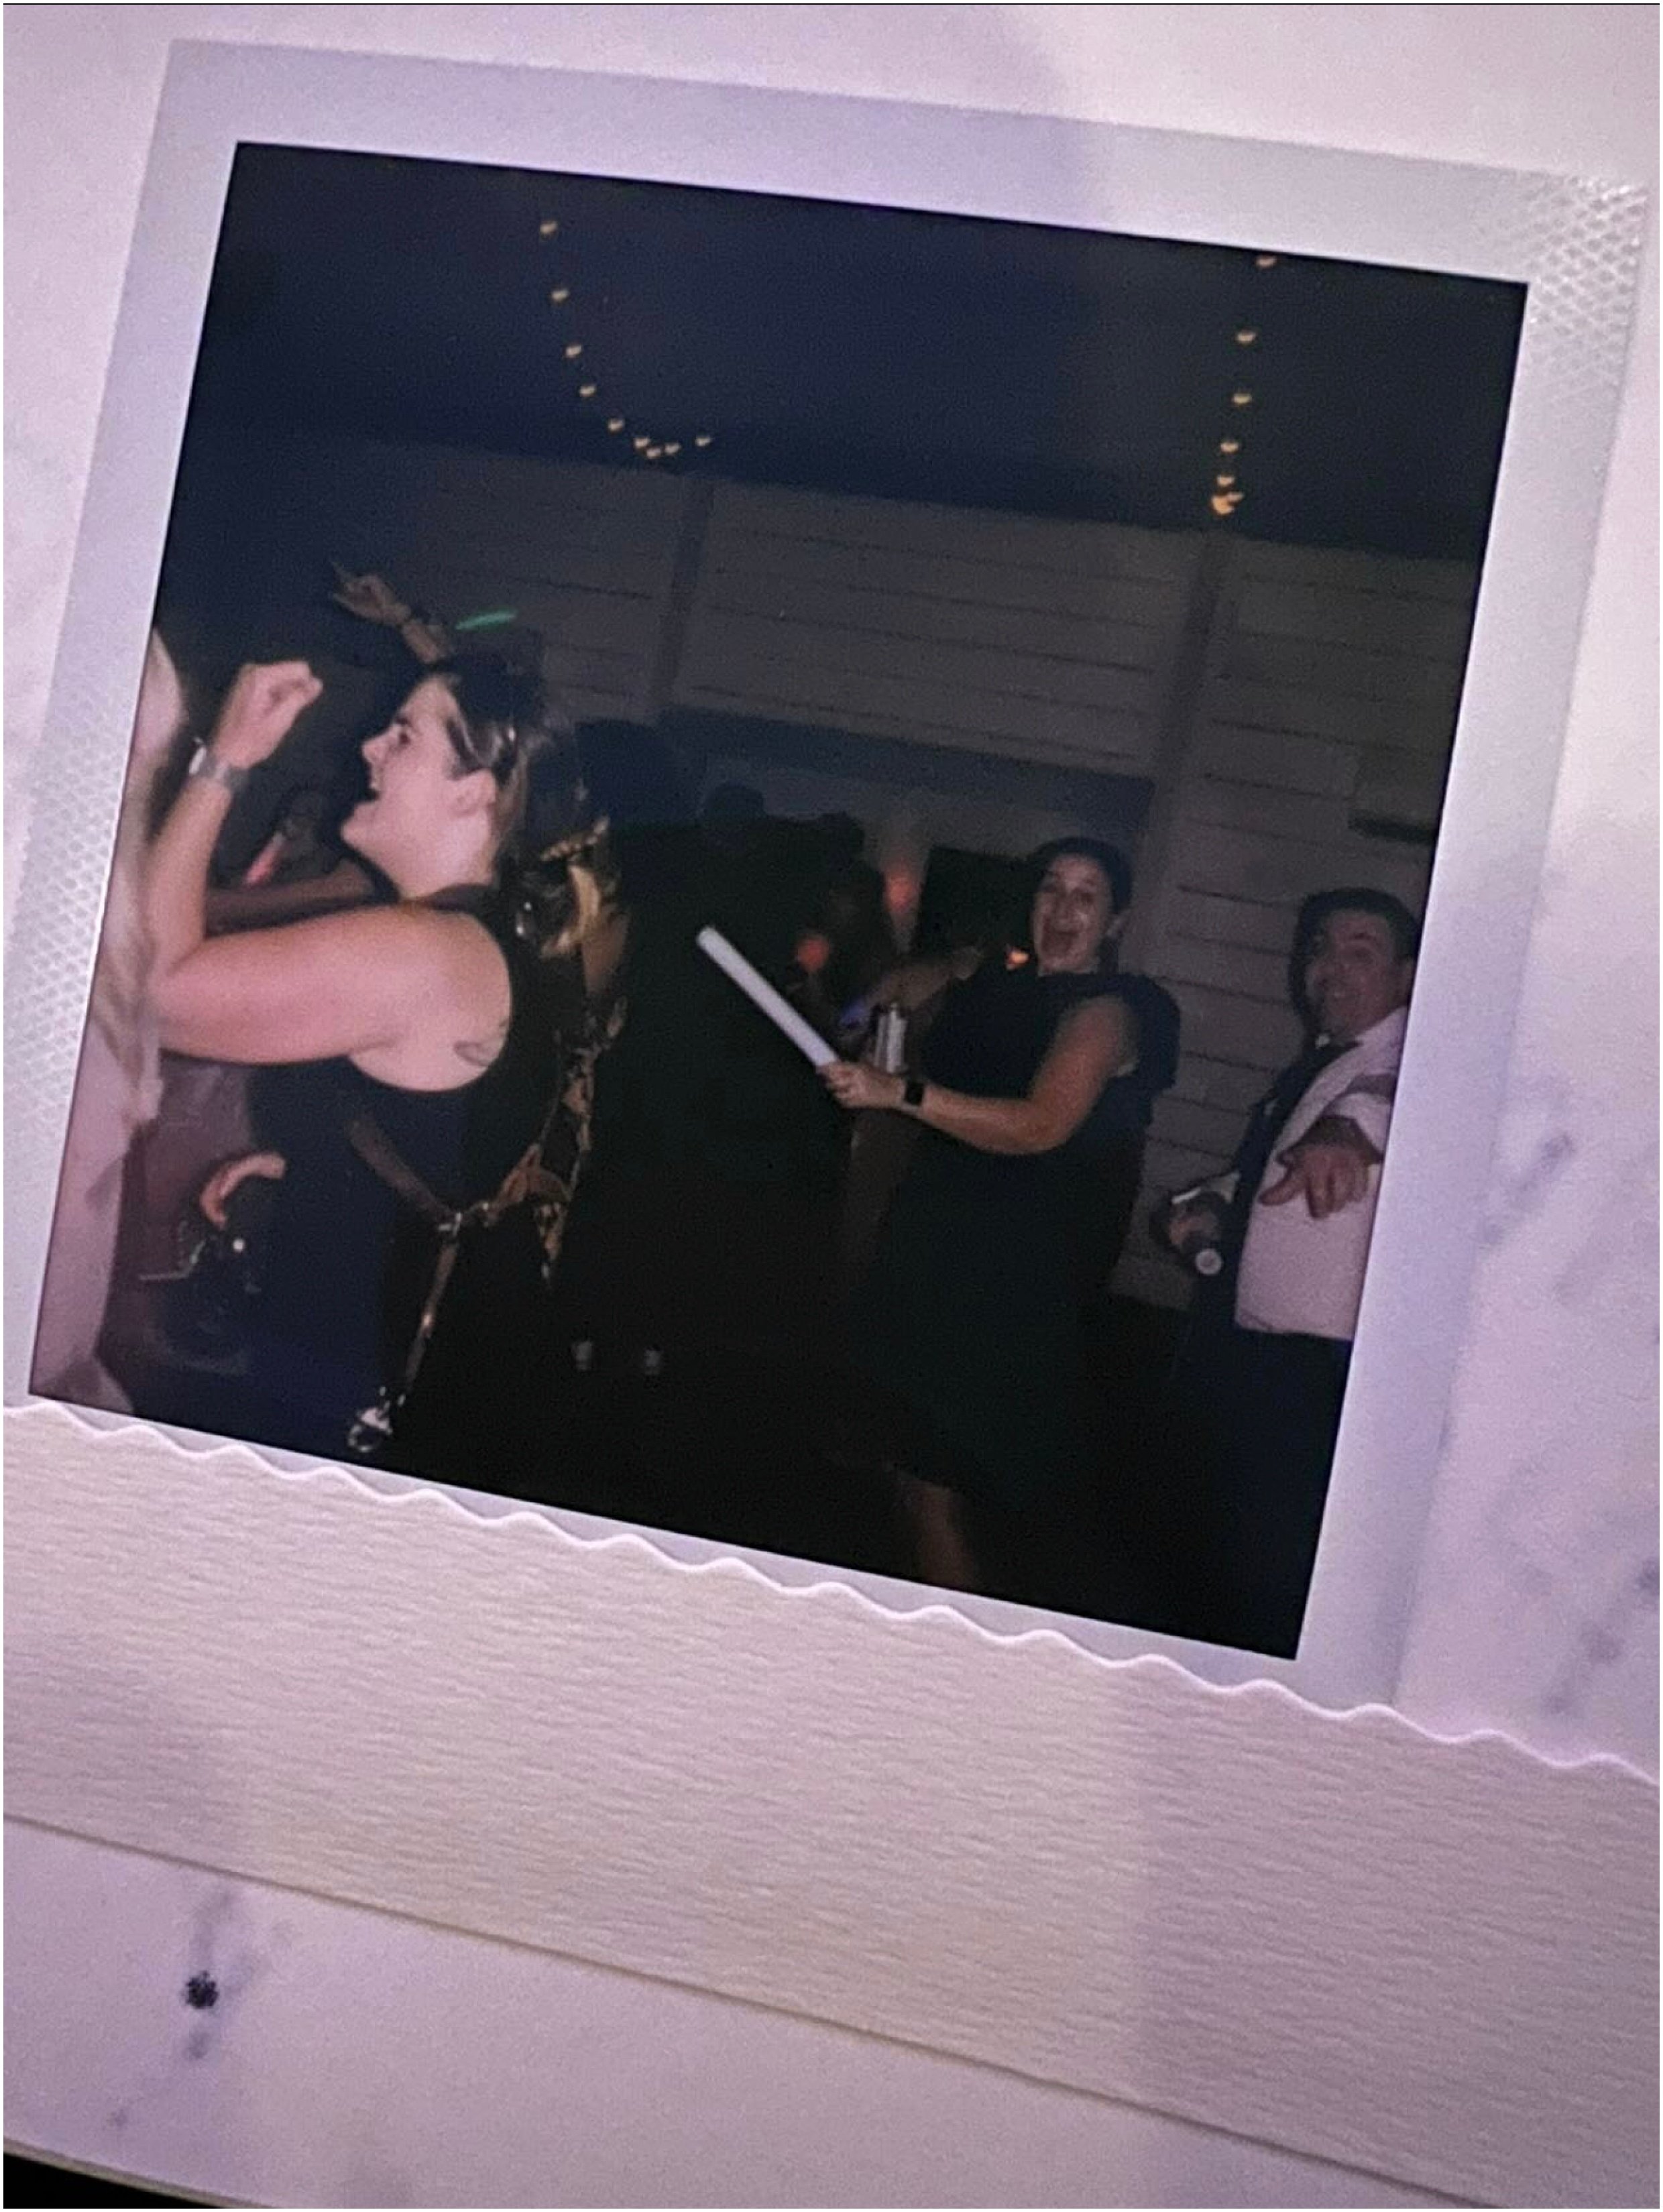 Emma sent me this photo of a polaroid taken of me on the dancefloor. I had a blast, if you couldn't tell.